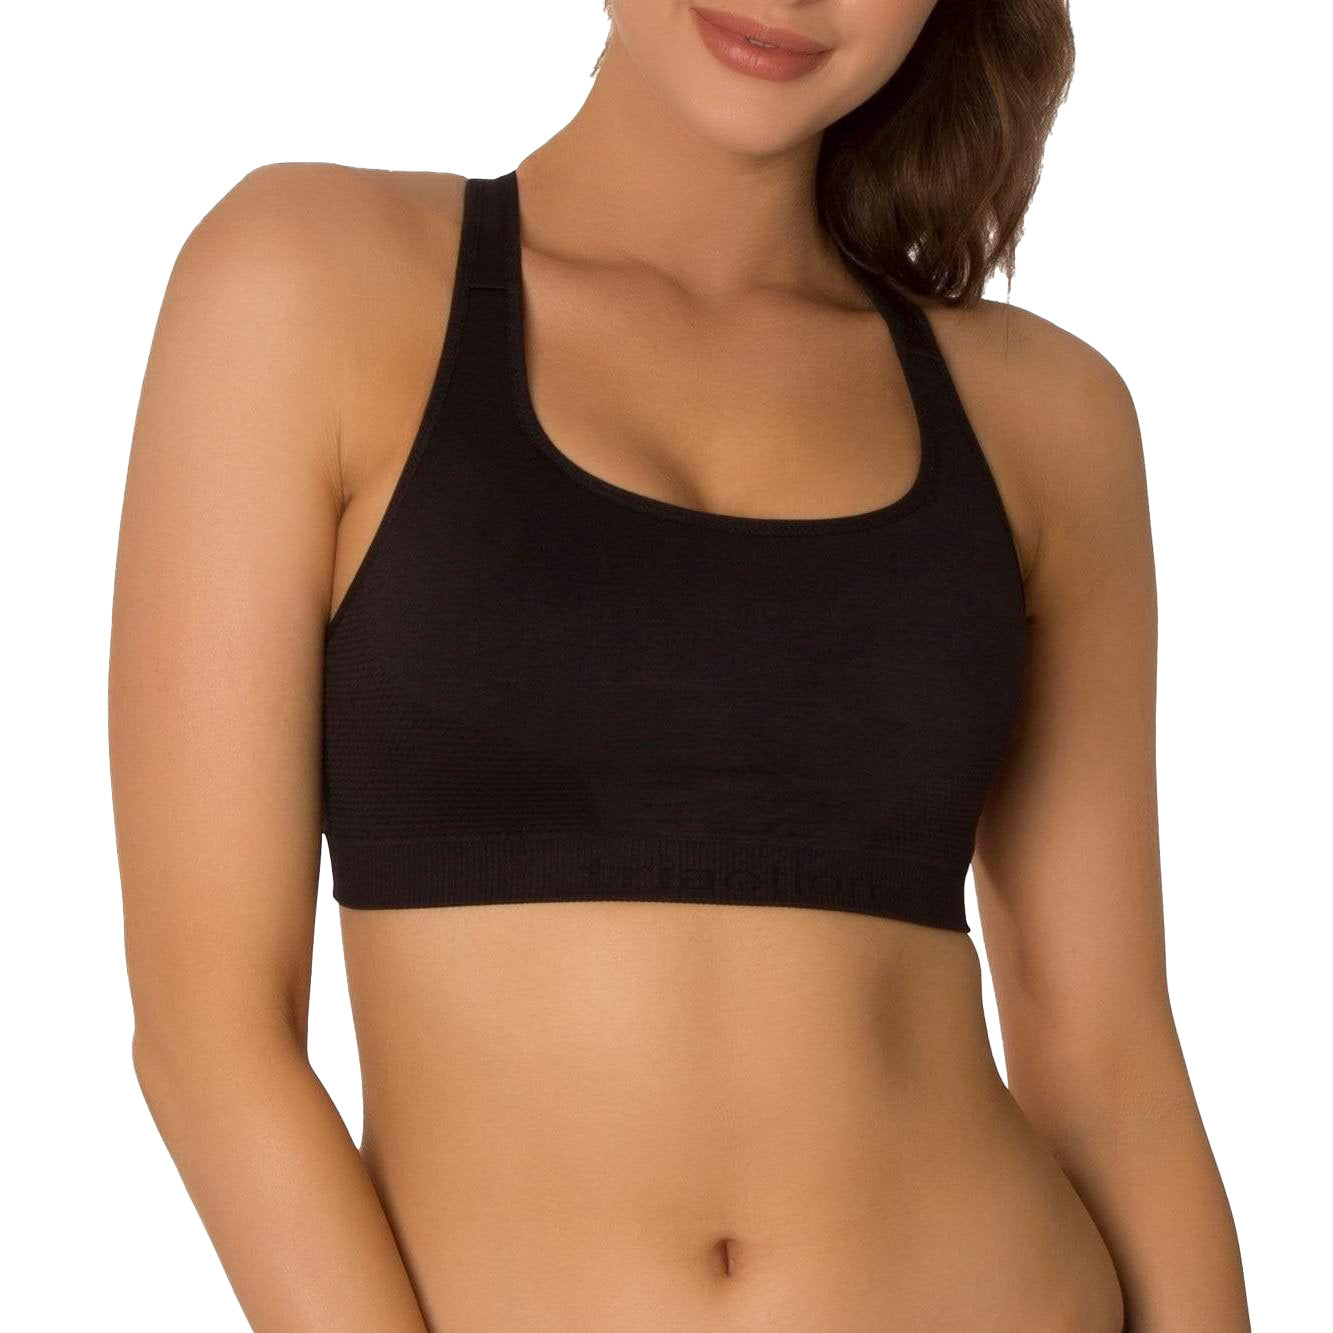 Triumph Sports Bra 8 / Black Triaction Seamfree Crop Top from Illusions Lingerie in Melbourne